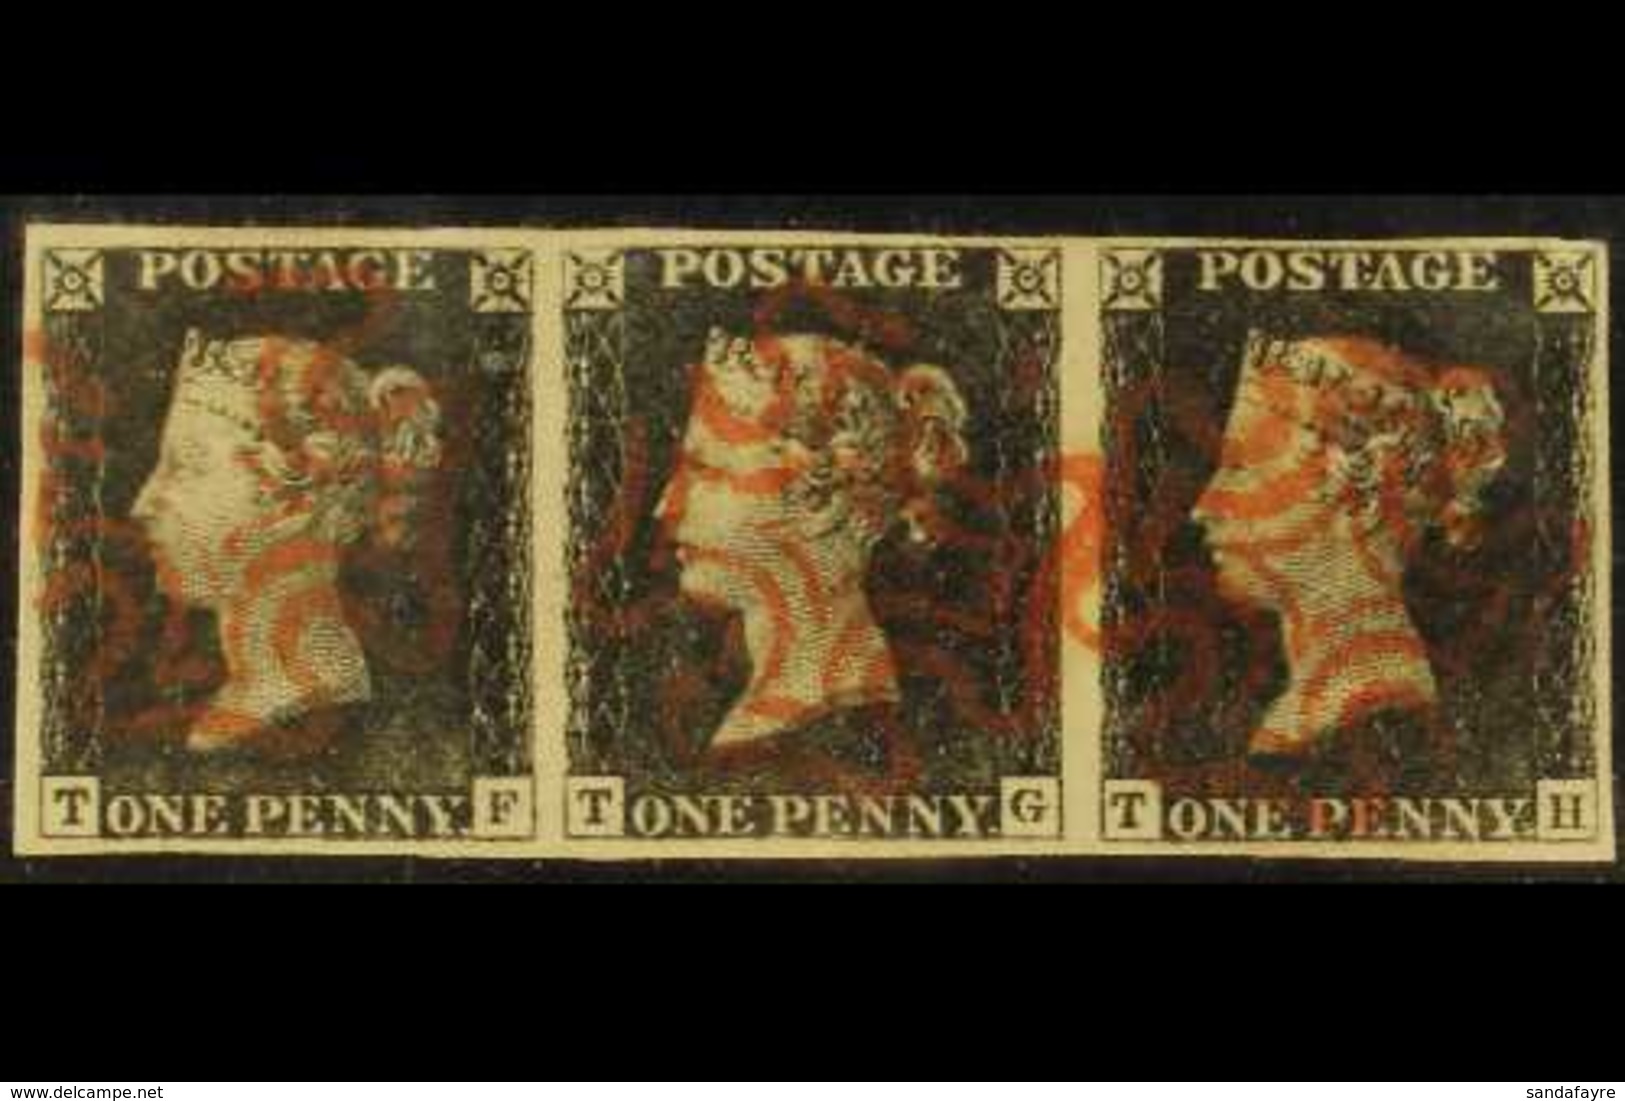 1840 1d Intense Black STRIP OF THREE 'TF - TH' From Plate 1b, SG 1, Used With 4 Large Margins & Superb Red MC Cancellati - Non Classificati